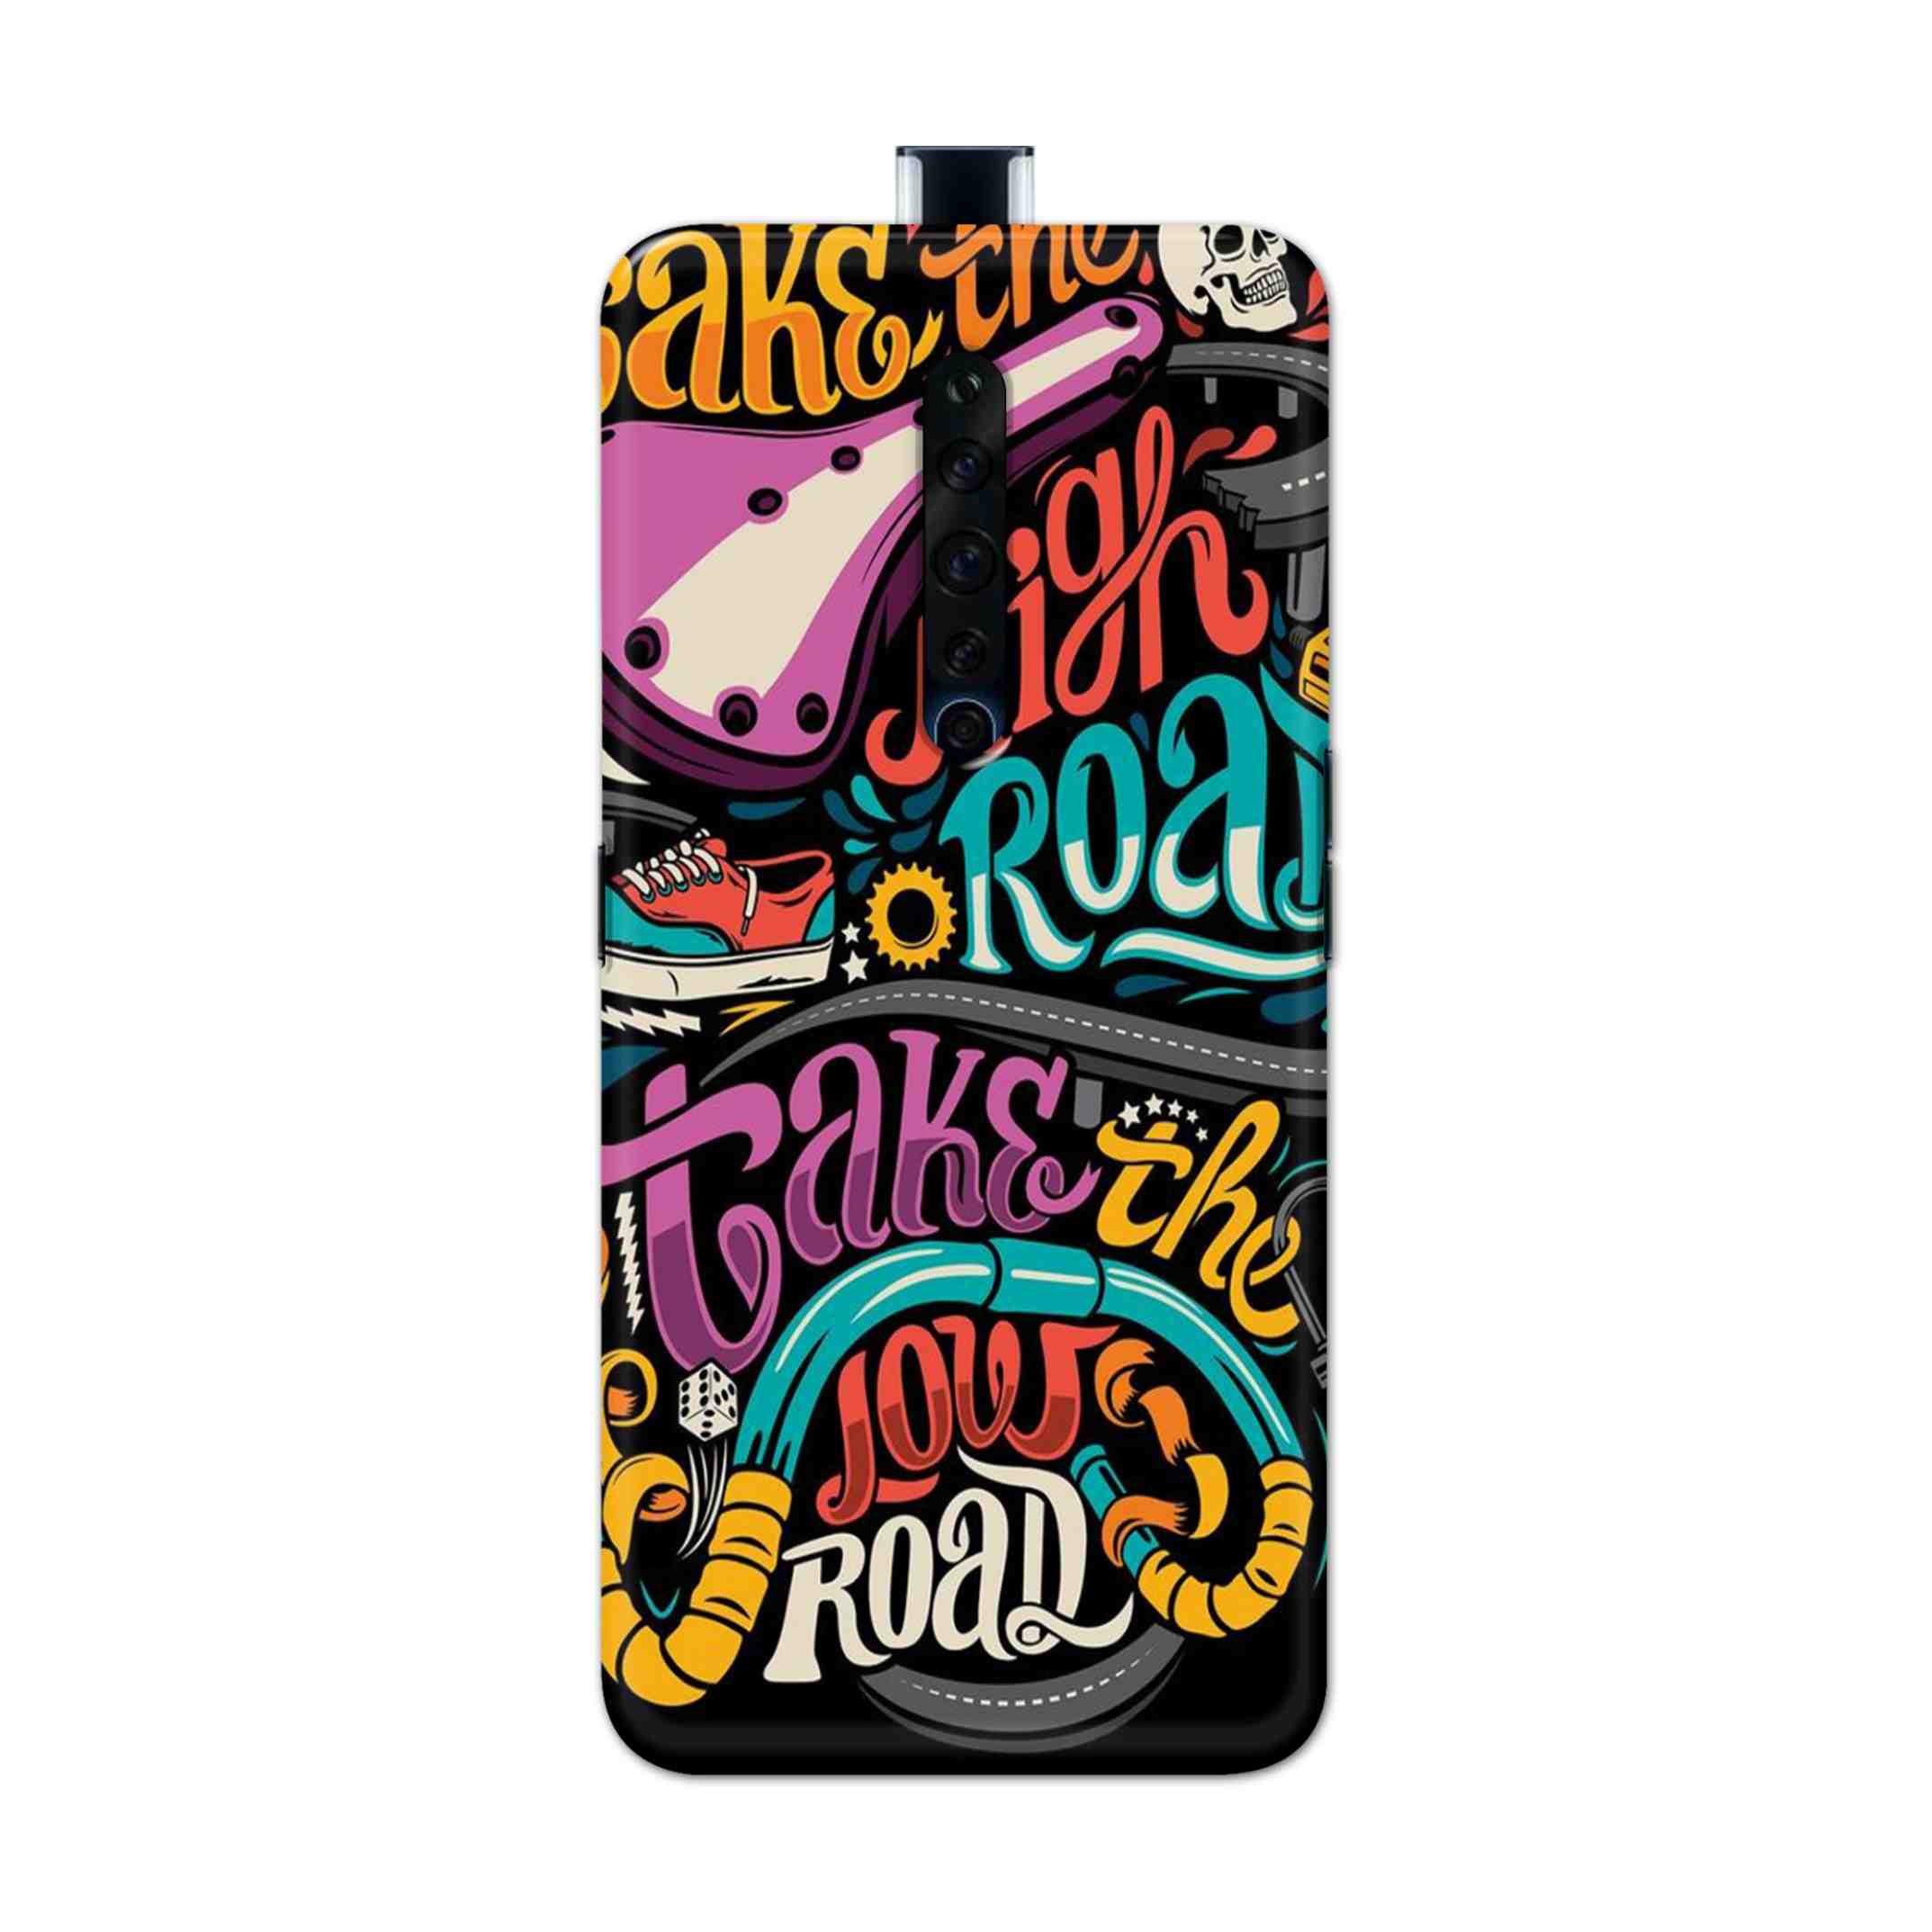 Buy Take The High Road Hard Back Mobile Phone Case Cover For Oppo Reno 2Z Online